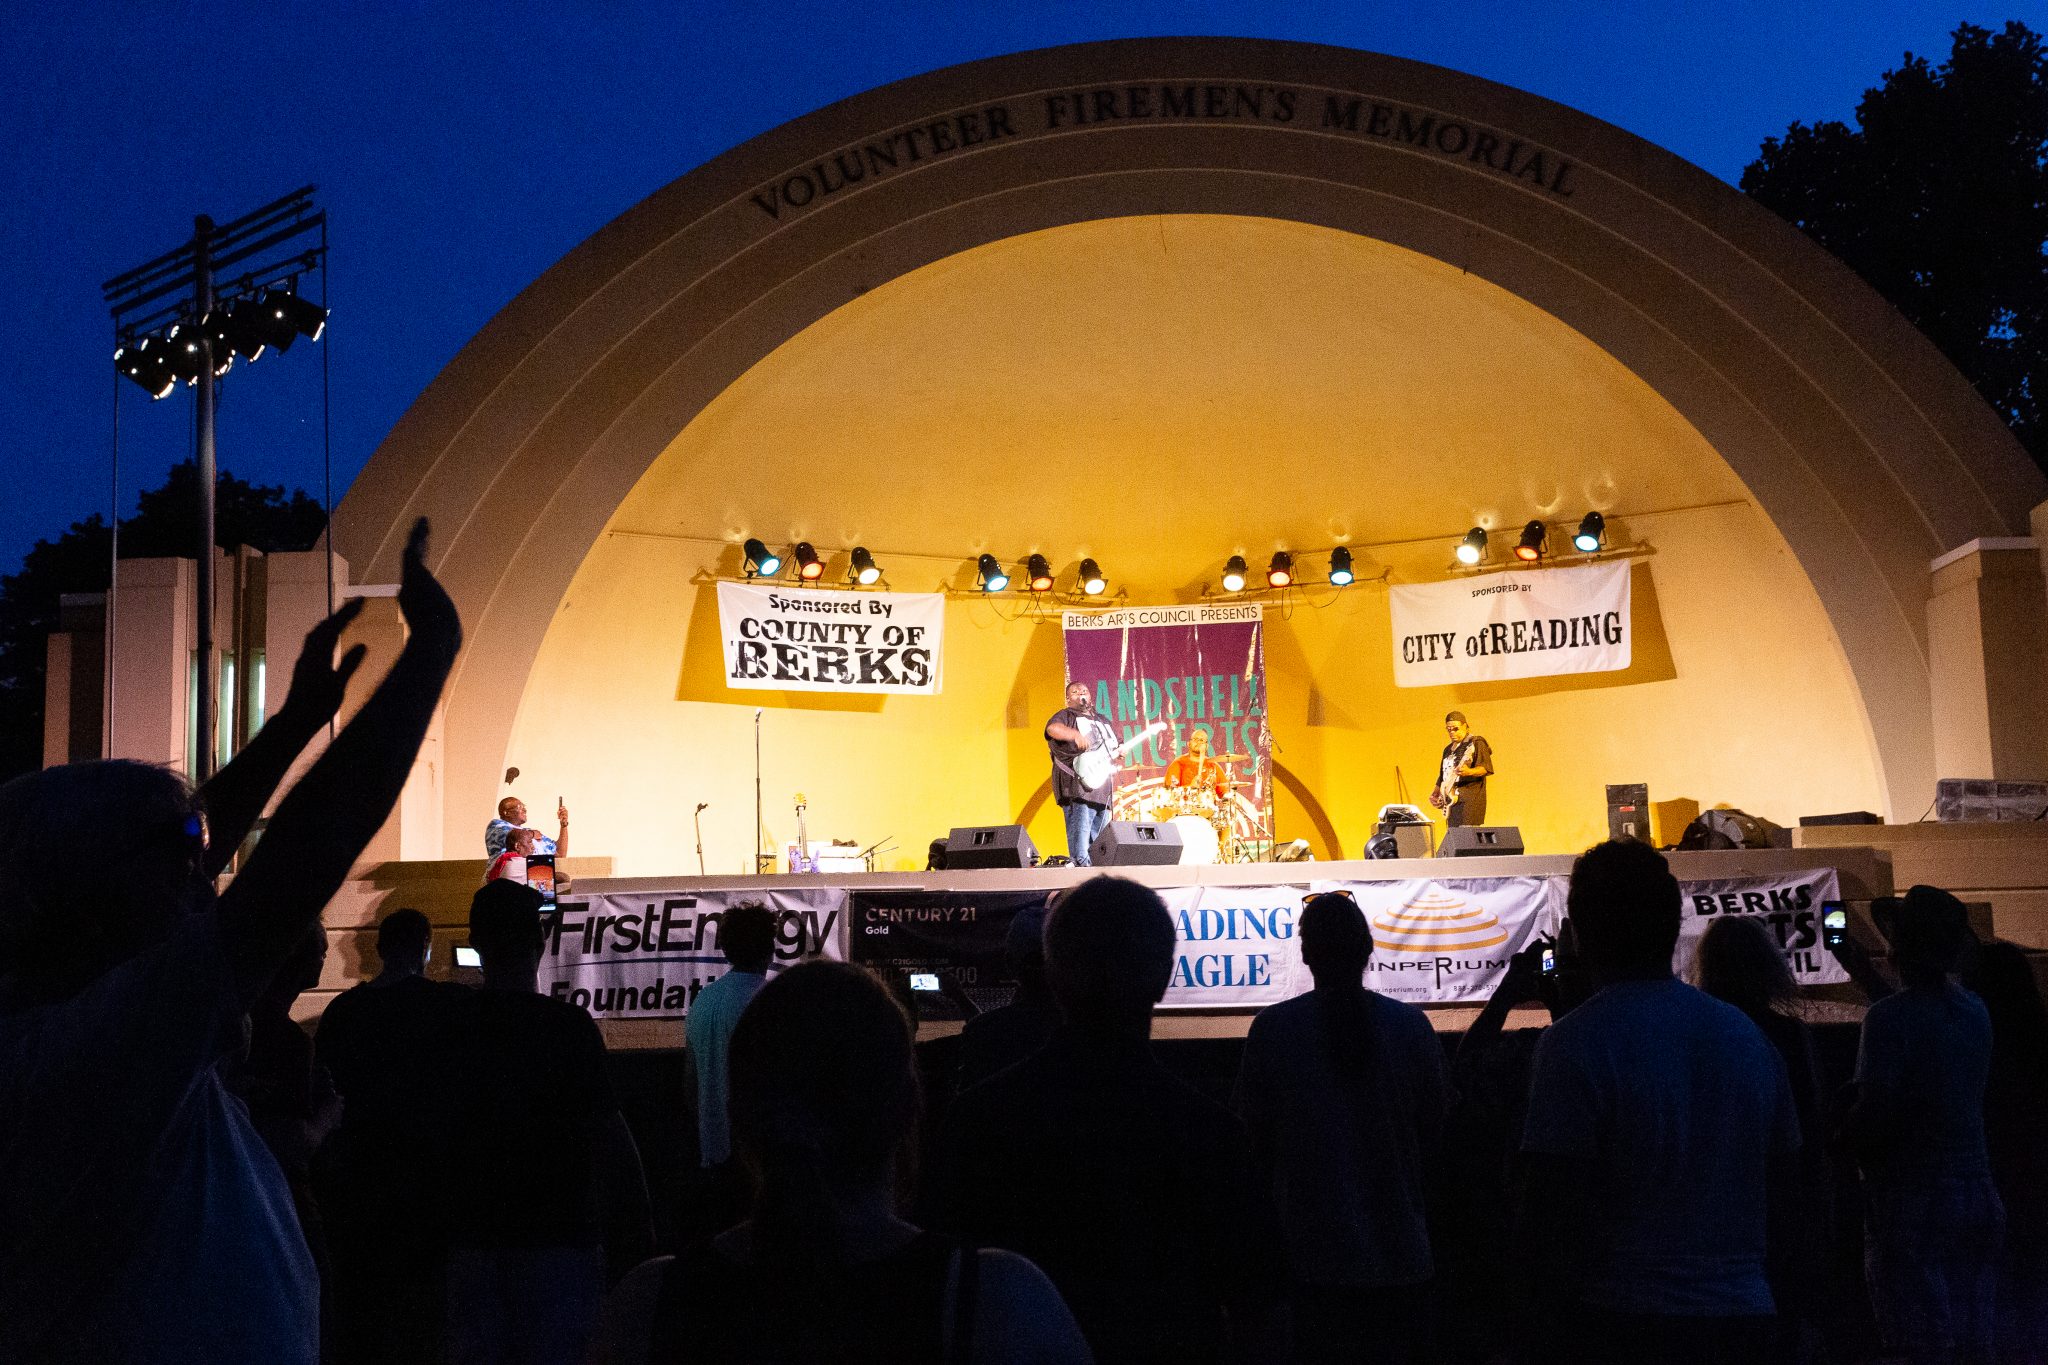 30th Annual Bandshell Concert Series set to Return in 2021